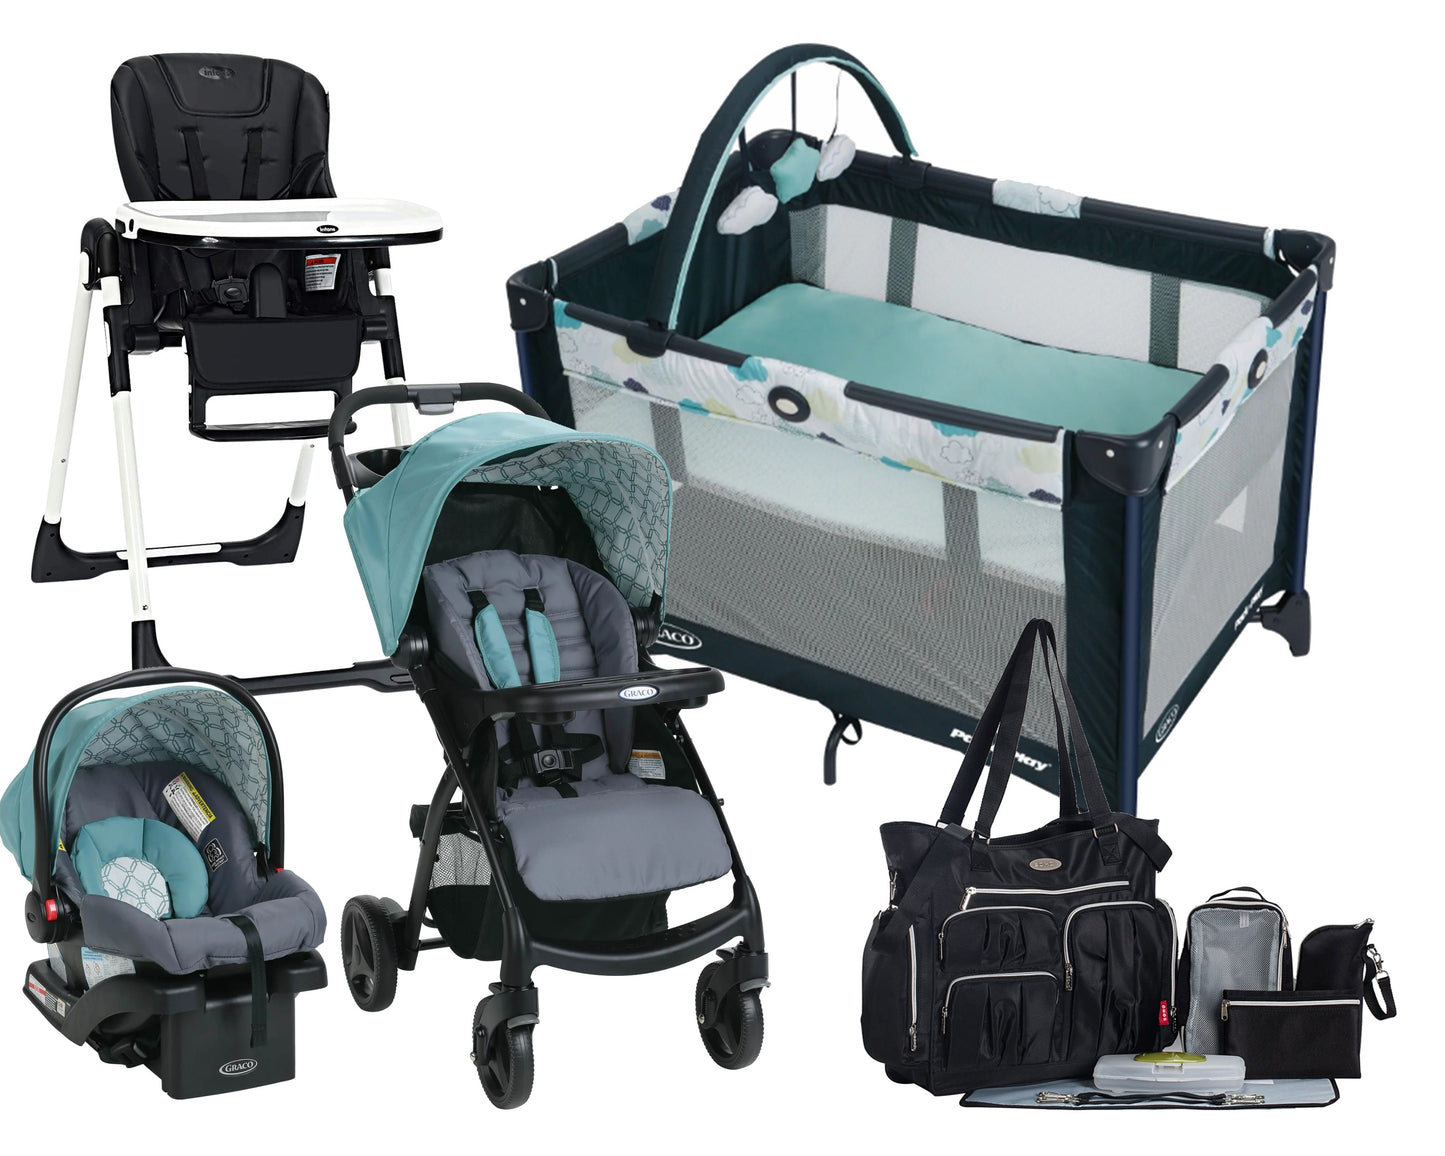 Infant Baby Stroller Travel System Combo with Car Seat Playard Nursery Blue